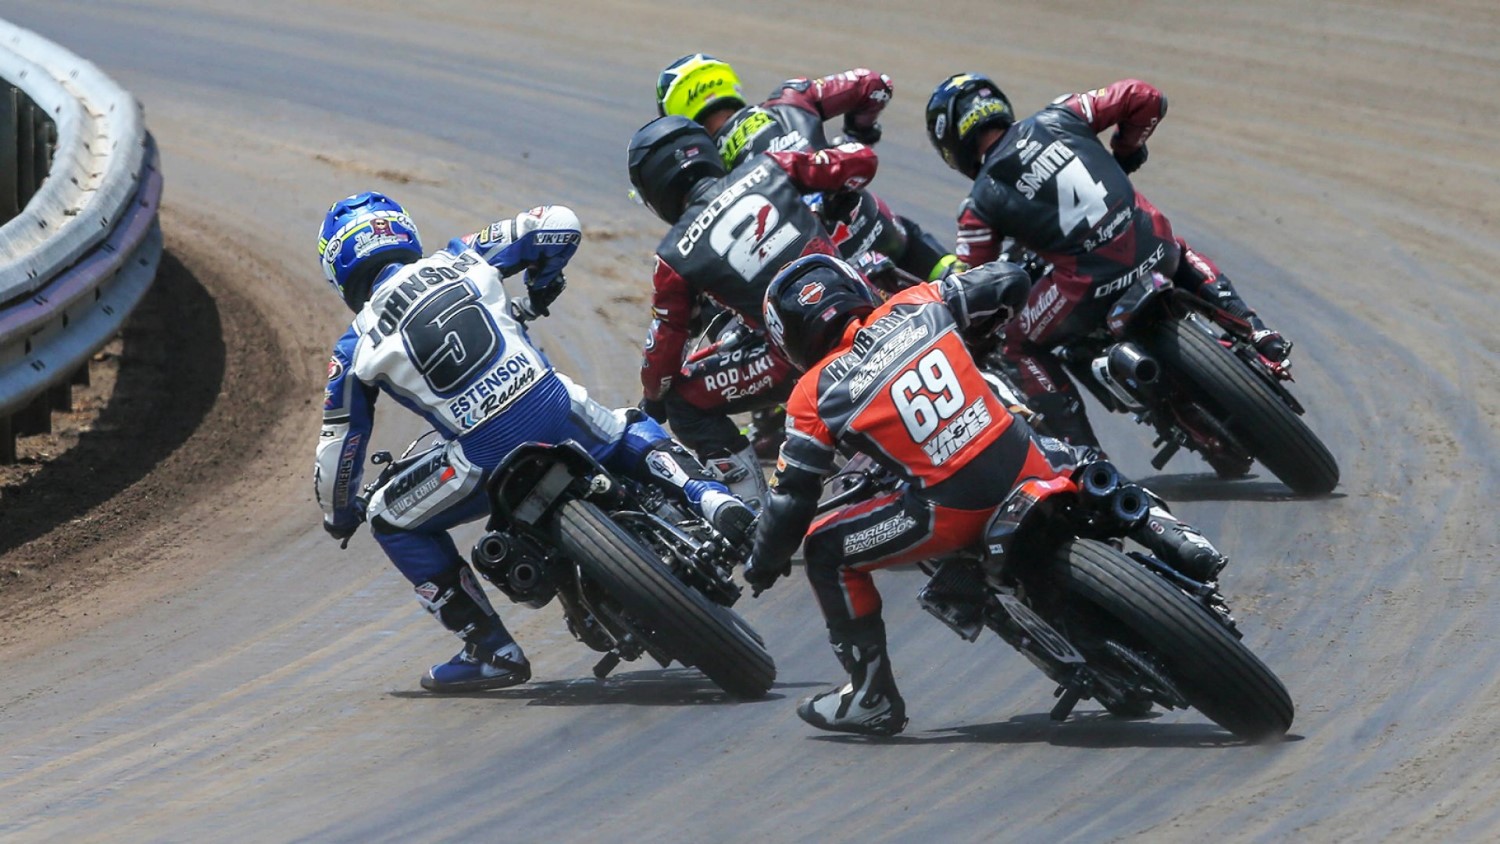 American Flat Track schedule features all 17 rounds on NBCSN